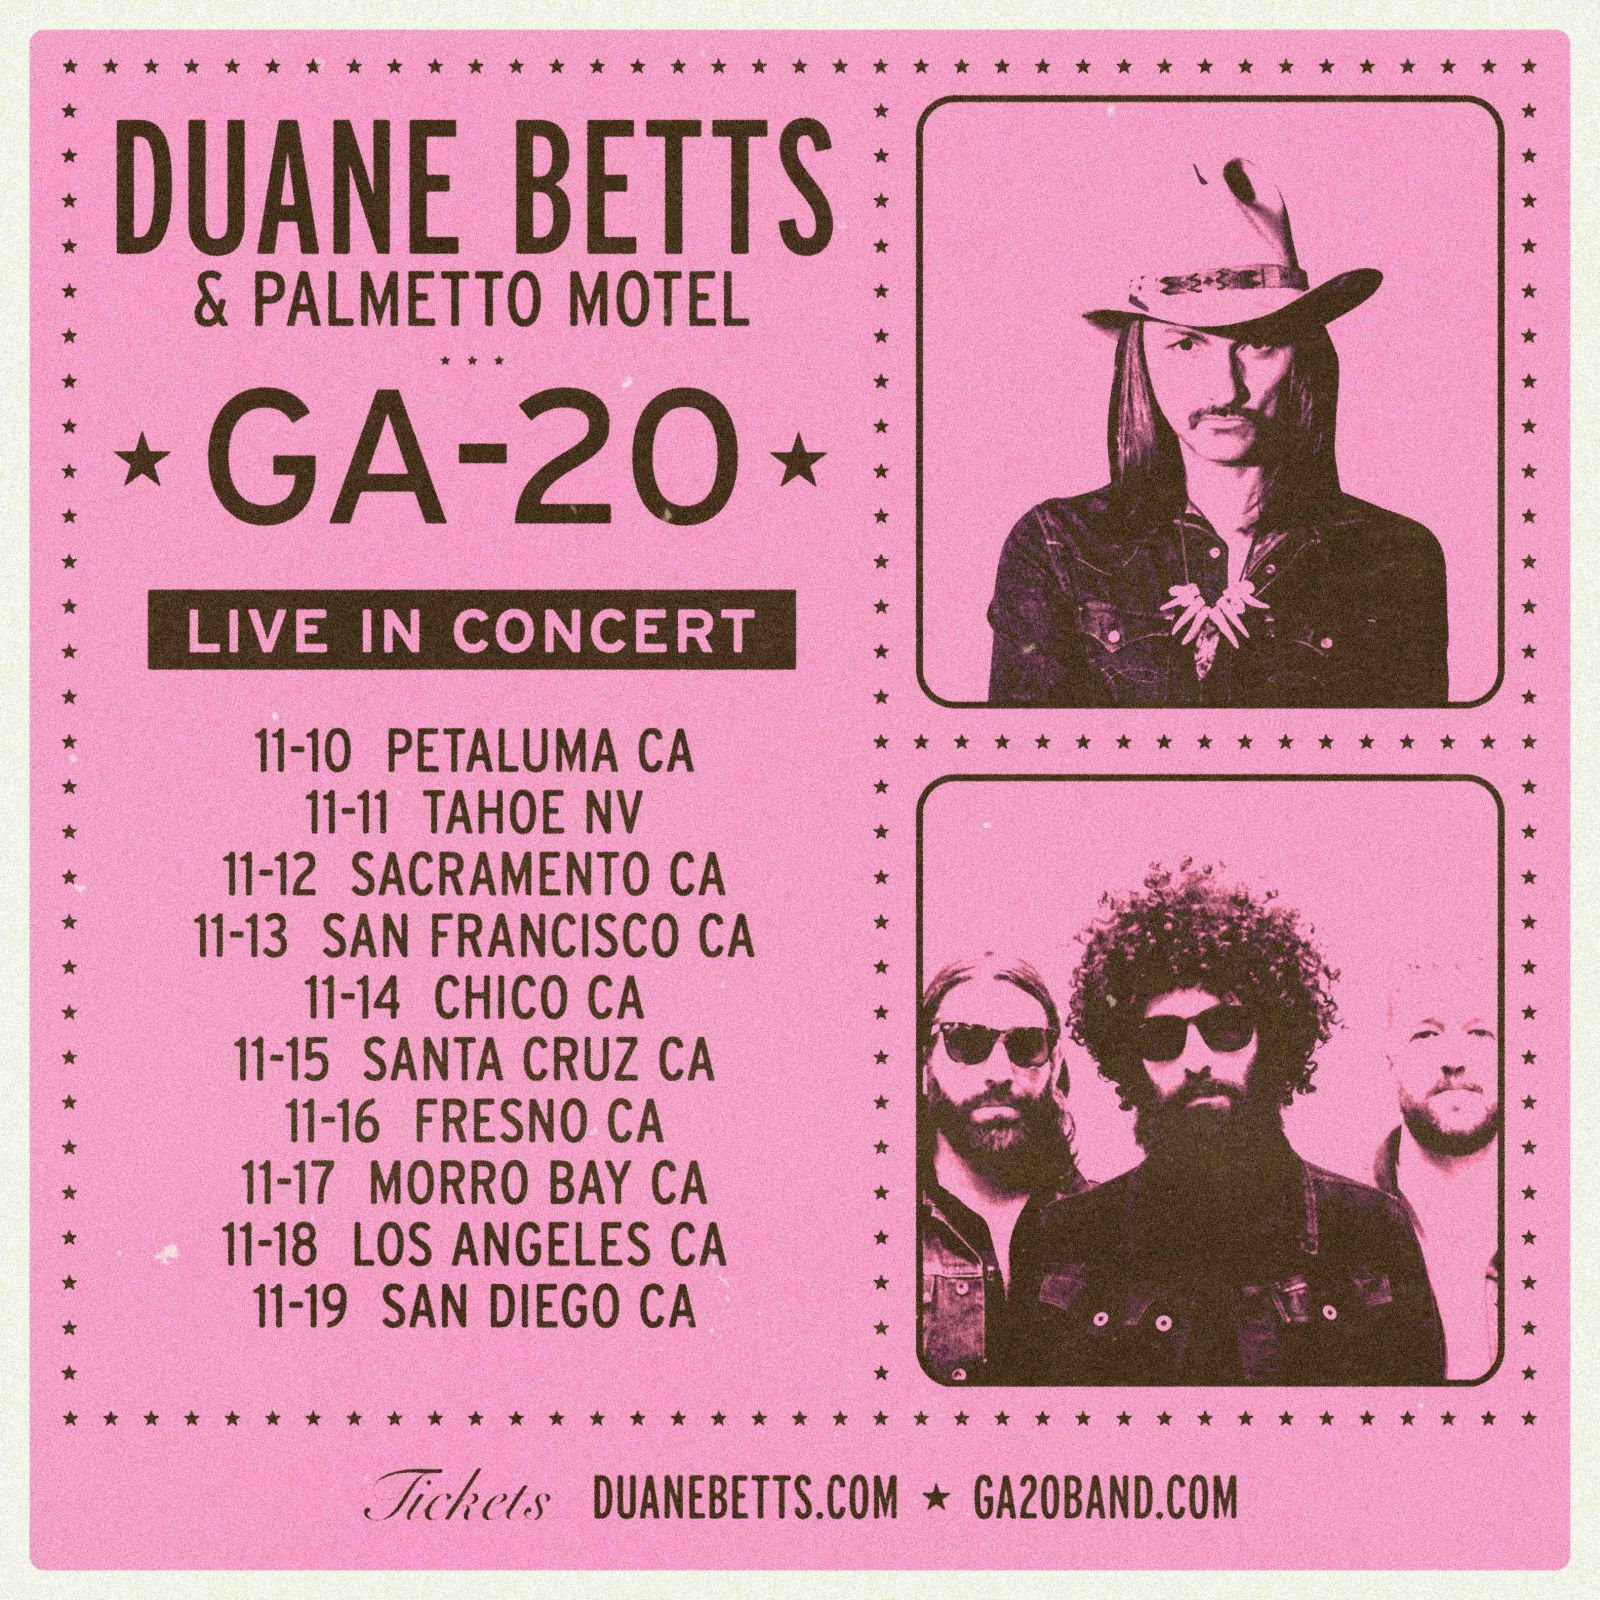 Duane Betts Extends Fall Tour | 10 West Coast Shows Added With GA-20